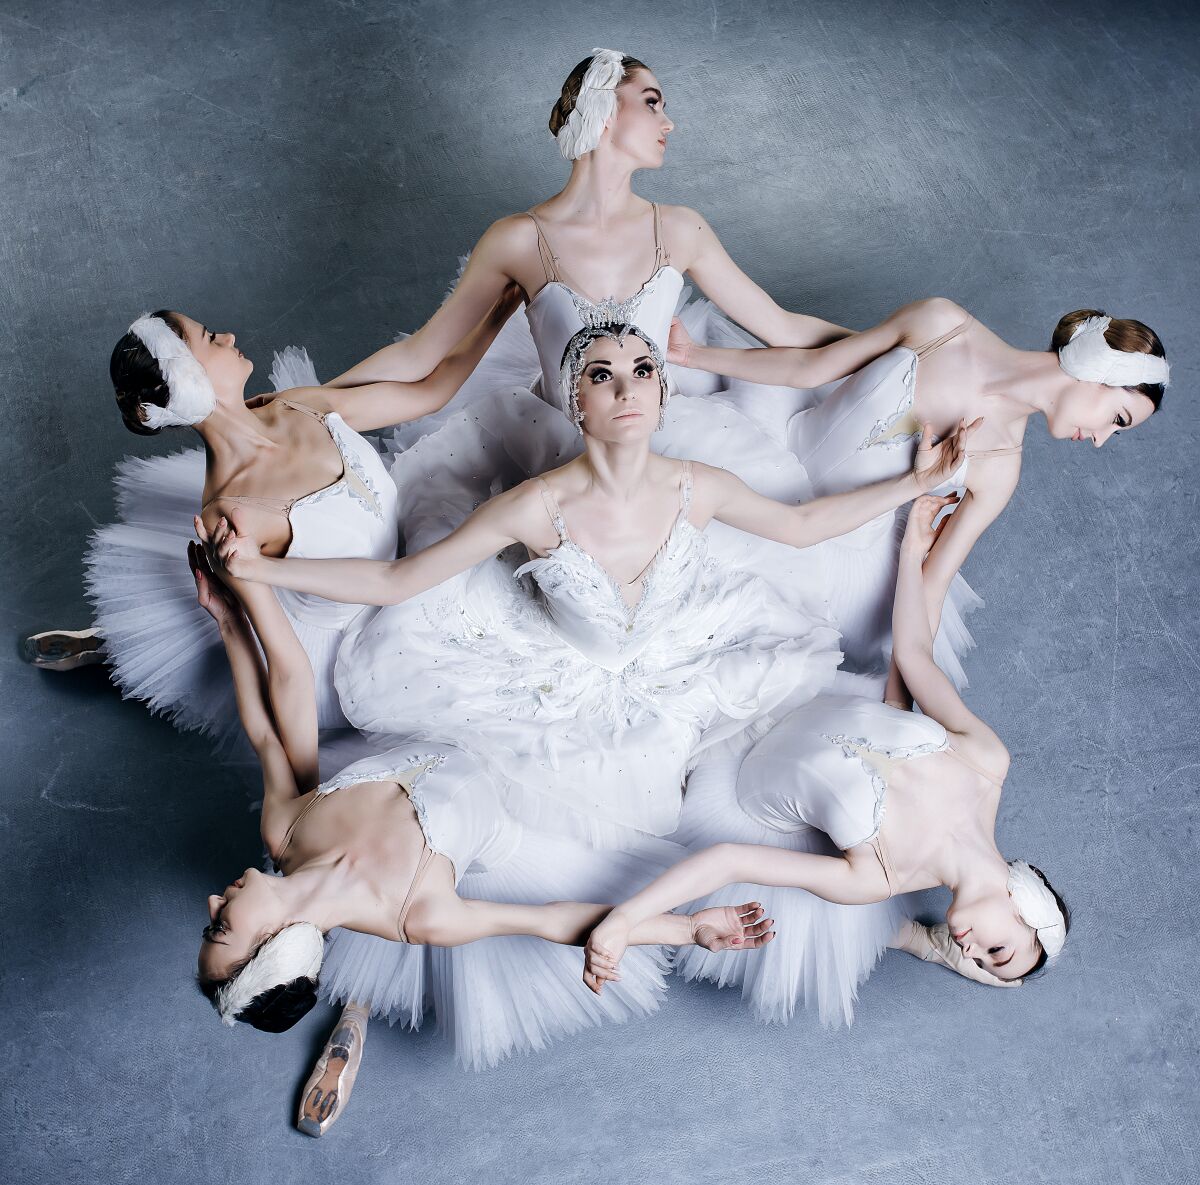 The ballet comapany RBT brings its "Swan Lake" to San Diego this spring.